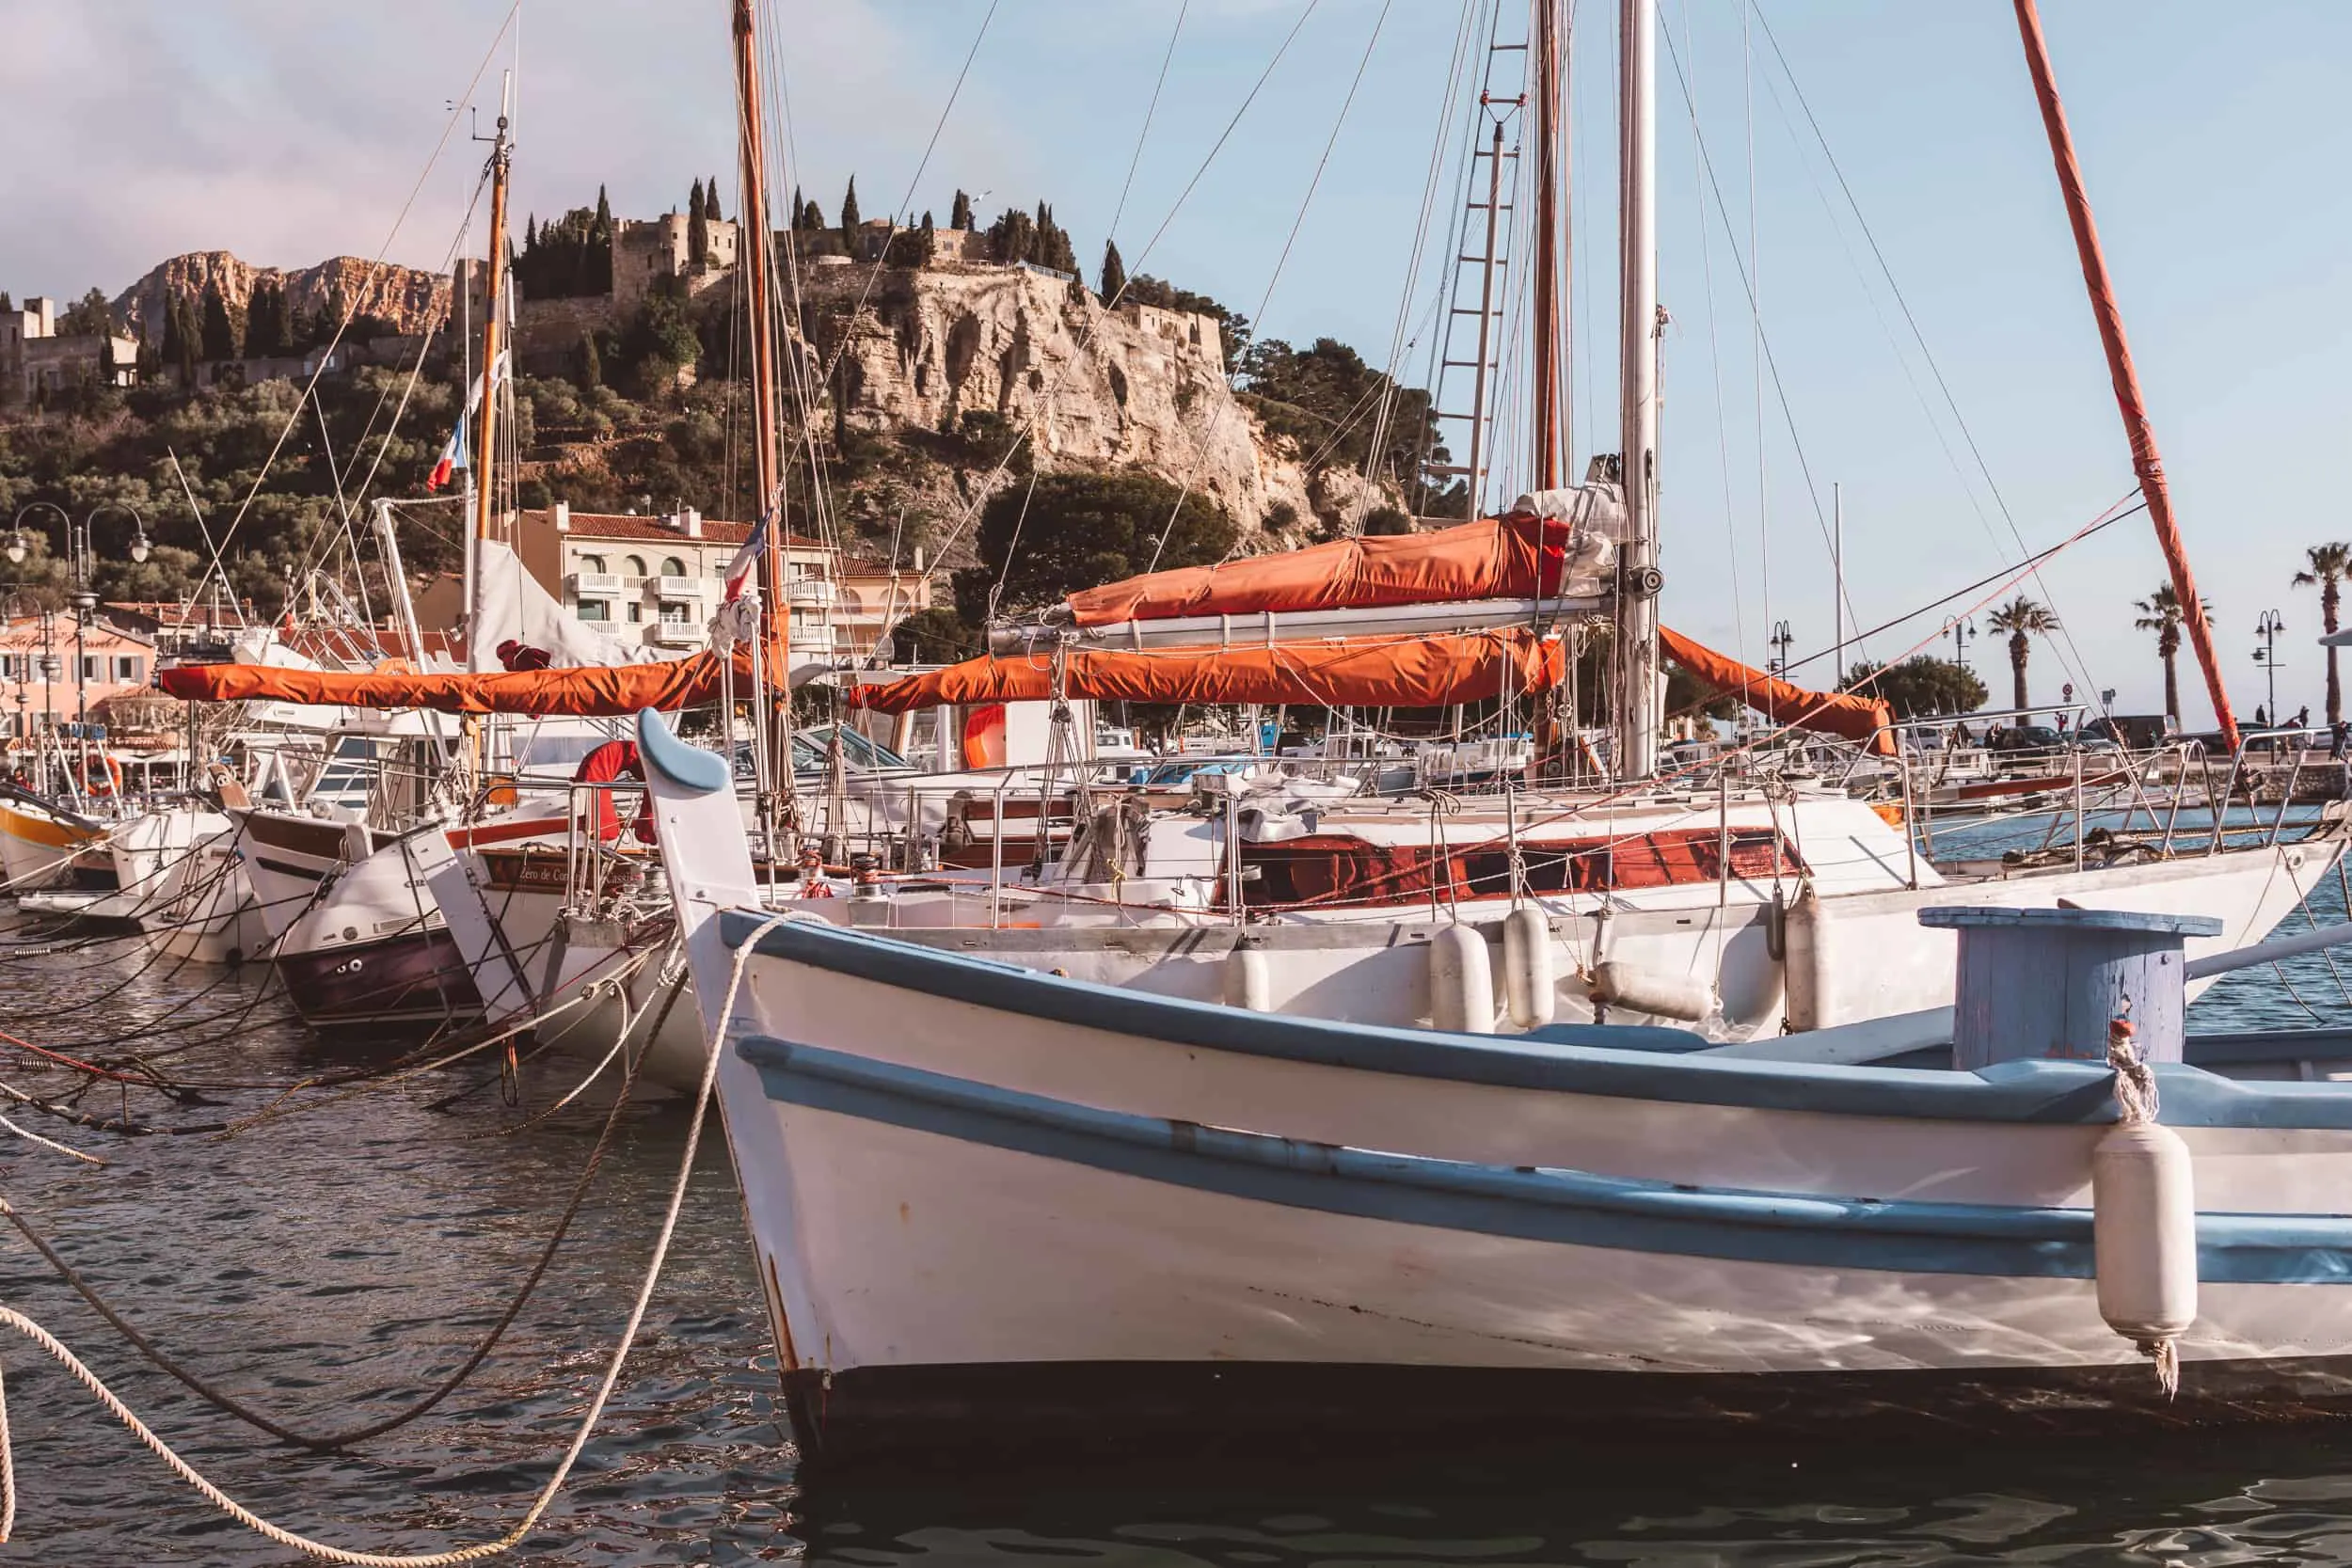 Things to do in Cassis, France